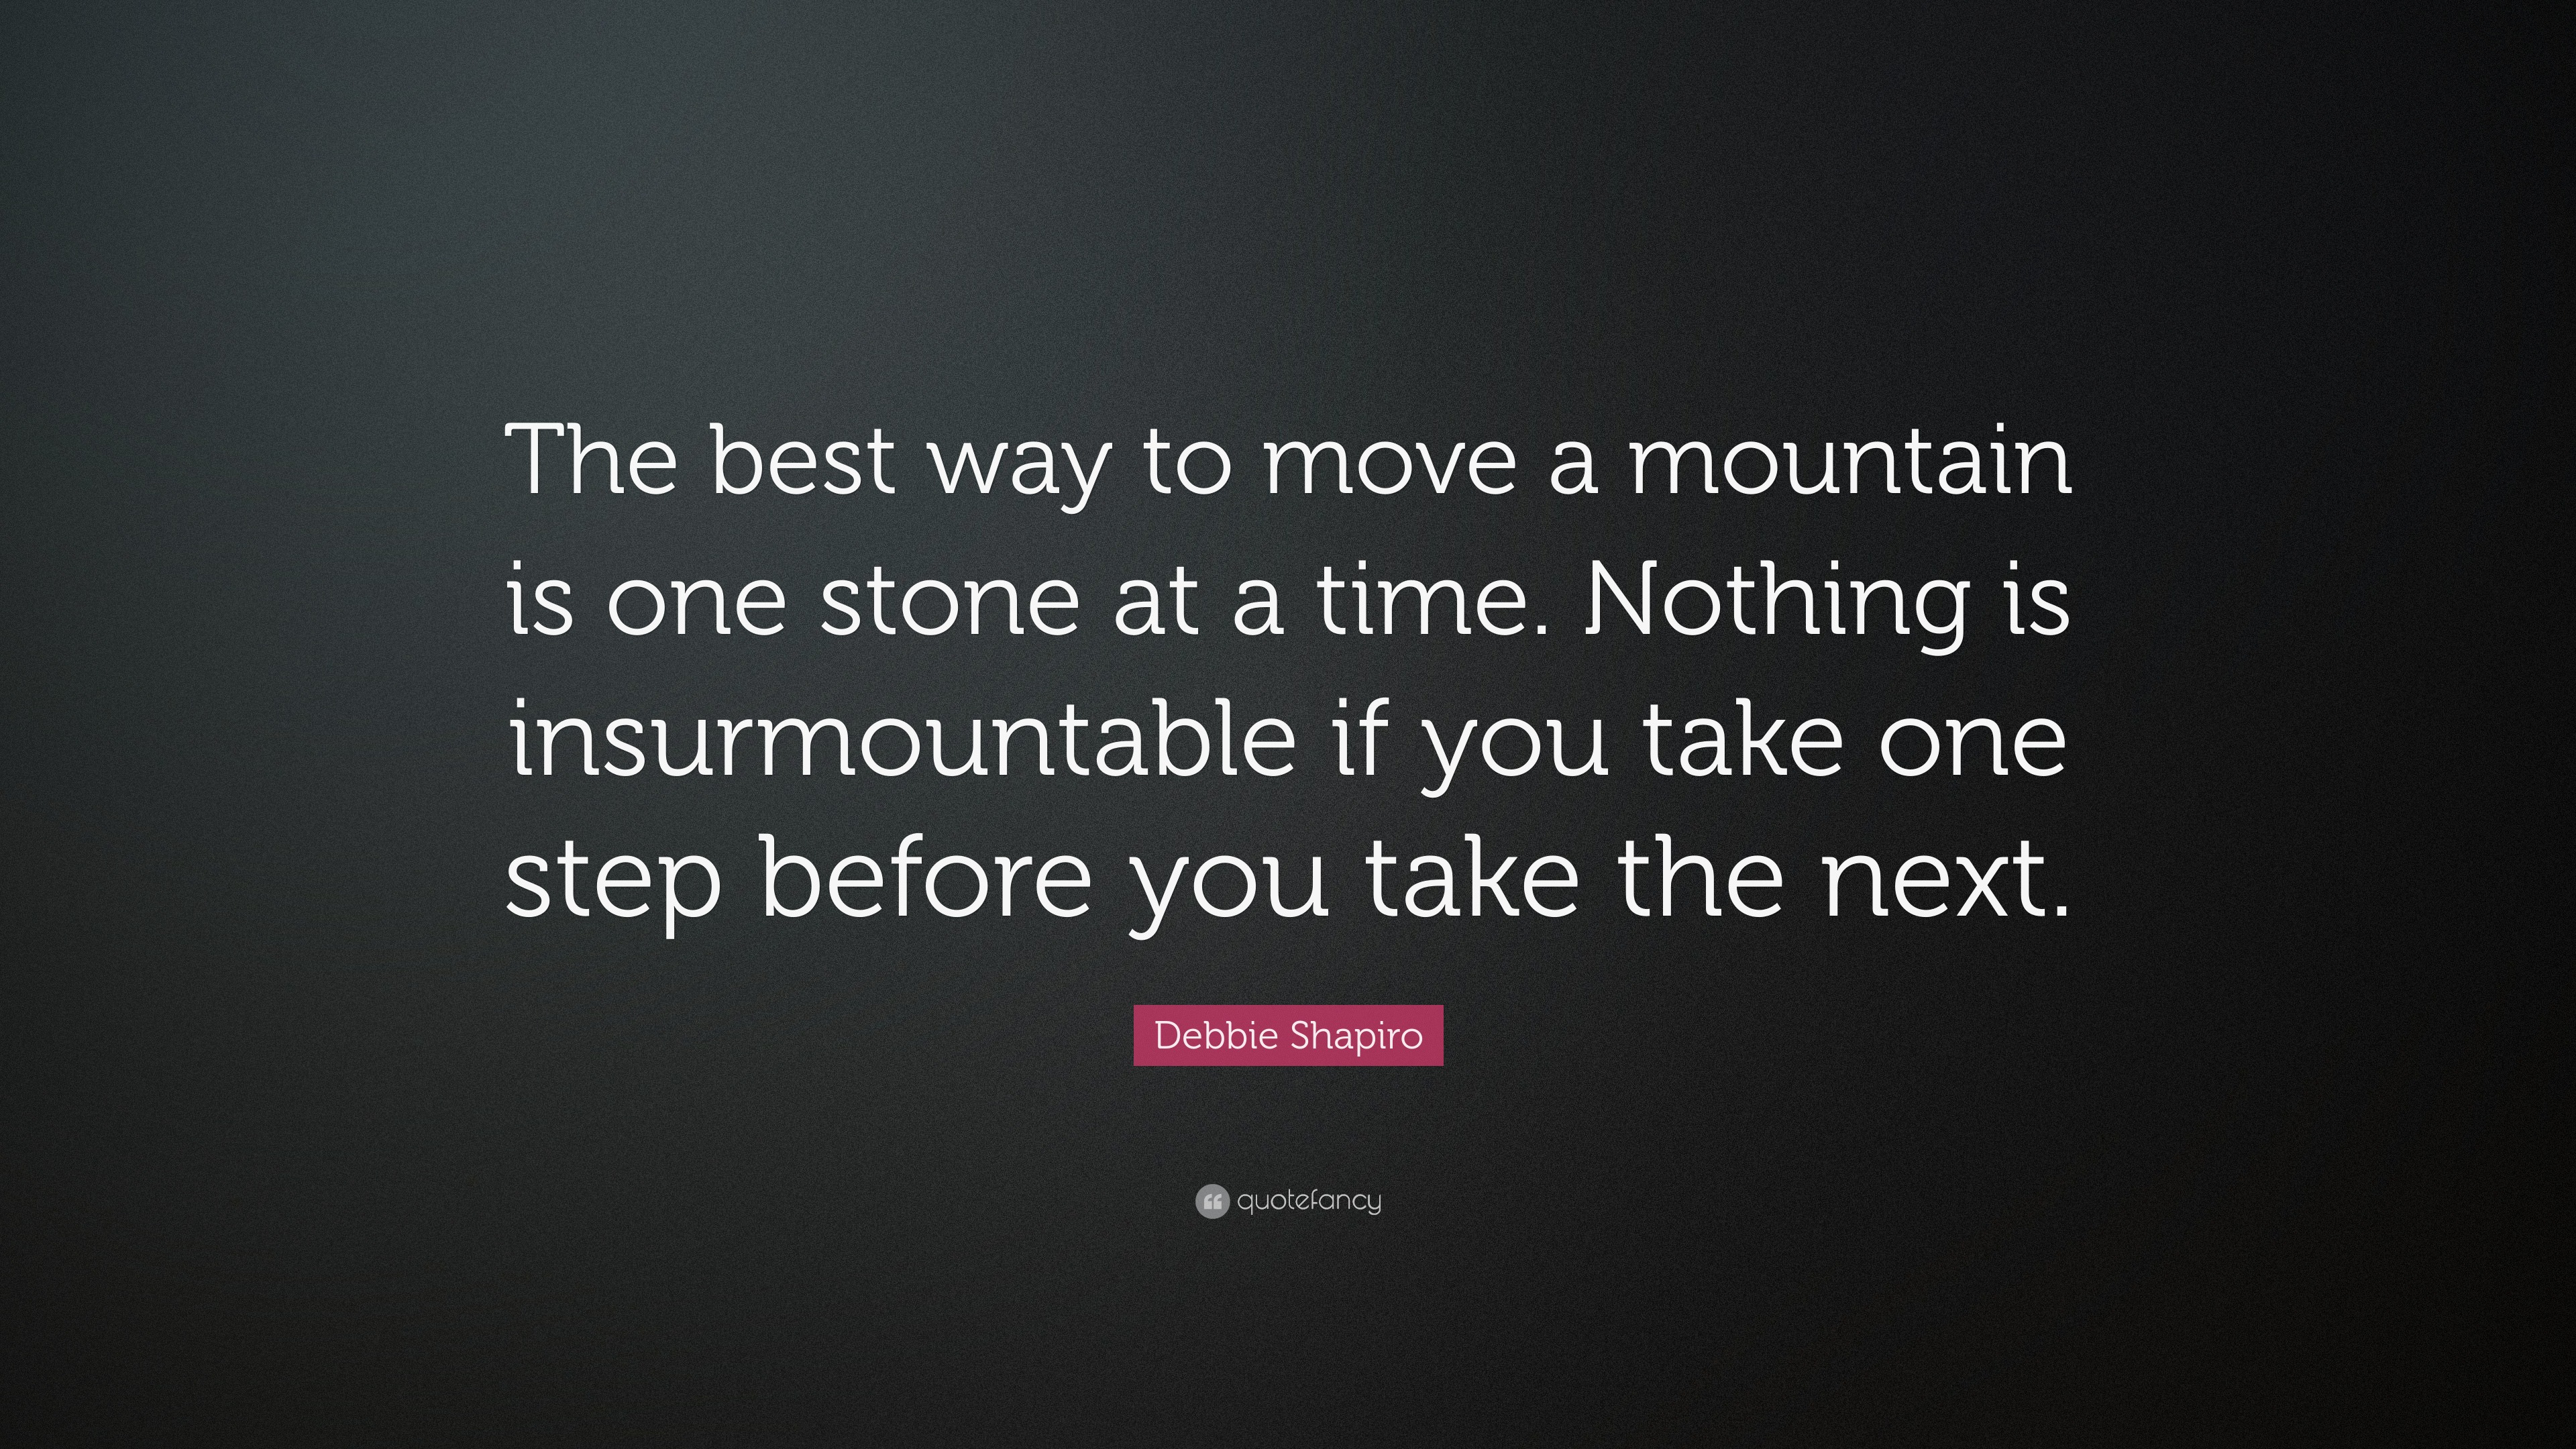 Debbie Shapiro Quote The Best Way To Move A Mountain Is One Stone At A Time Nothing Is Insurmountable If You Take One Step Before You Take T